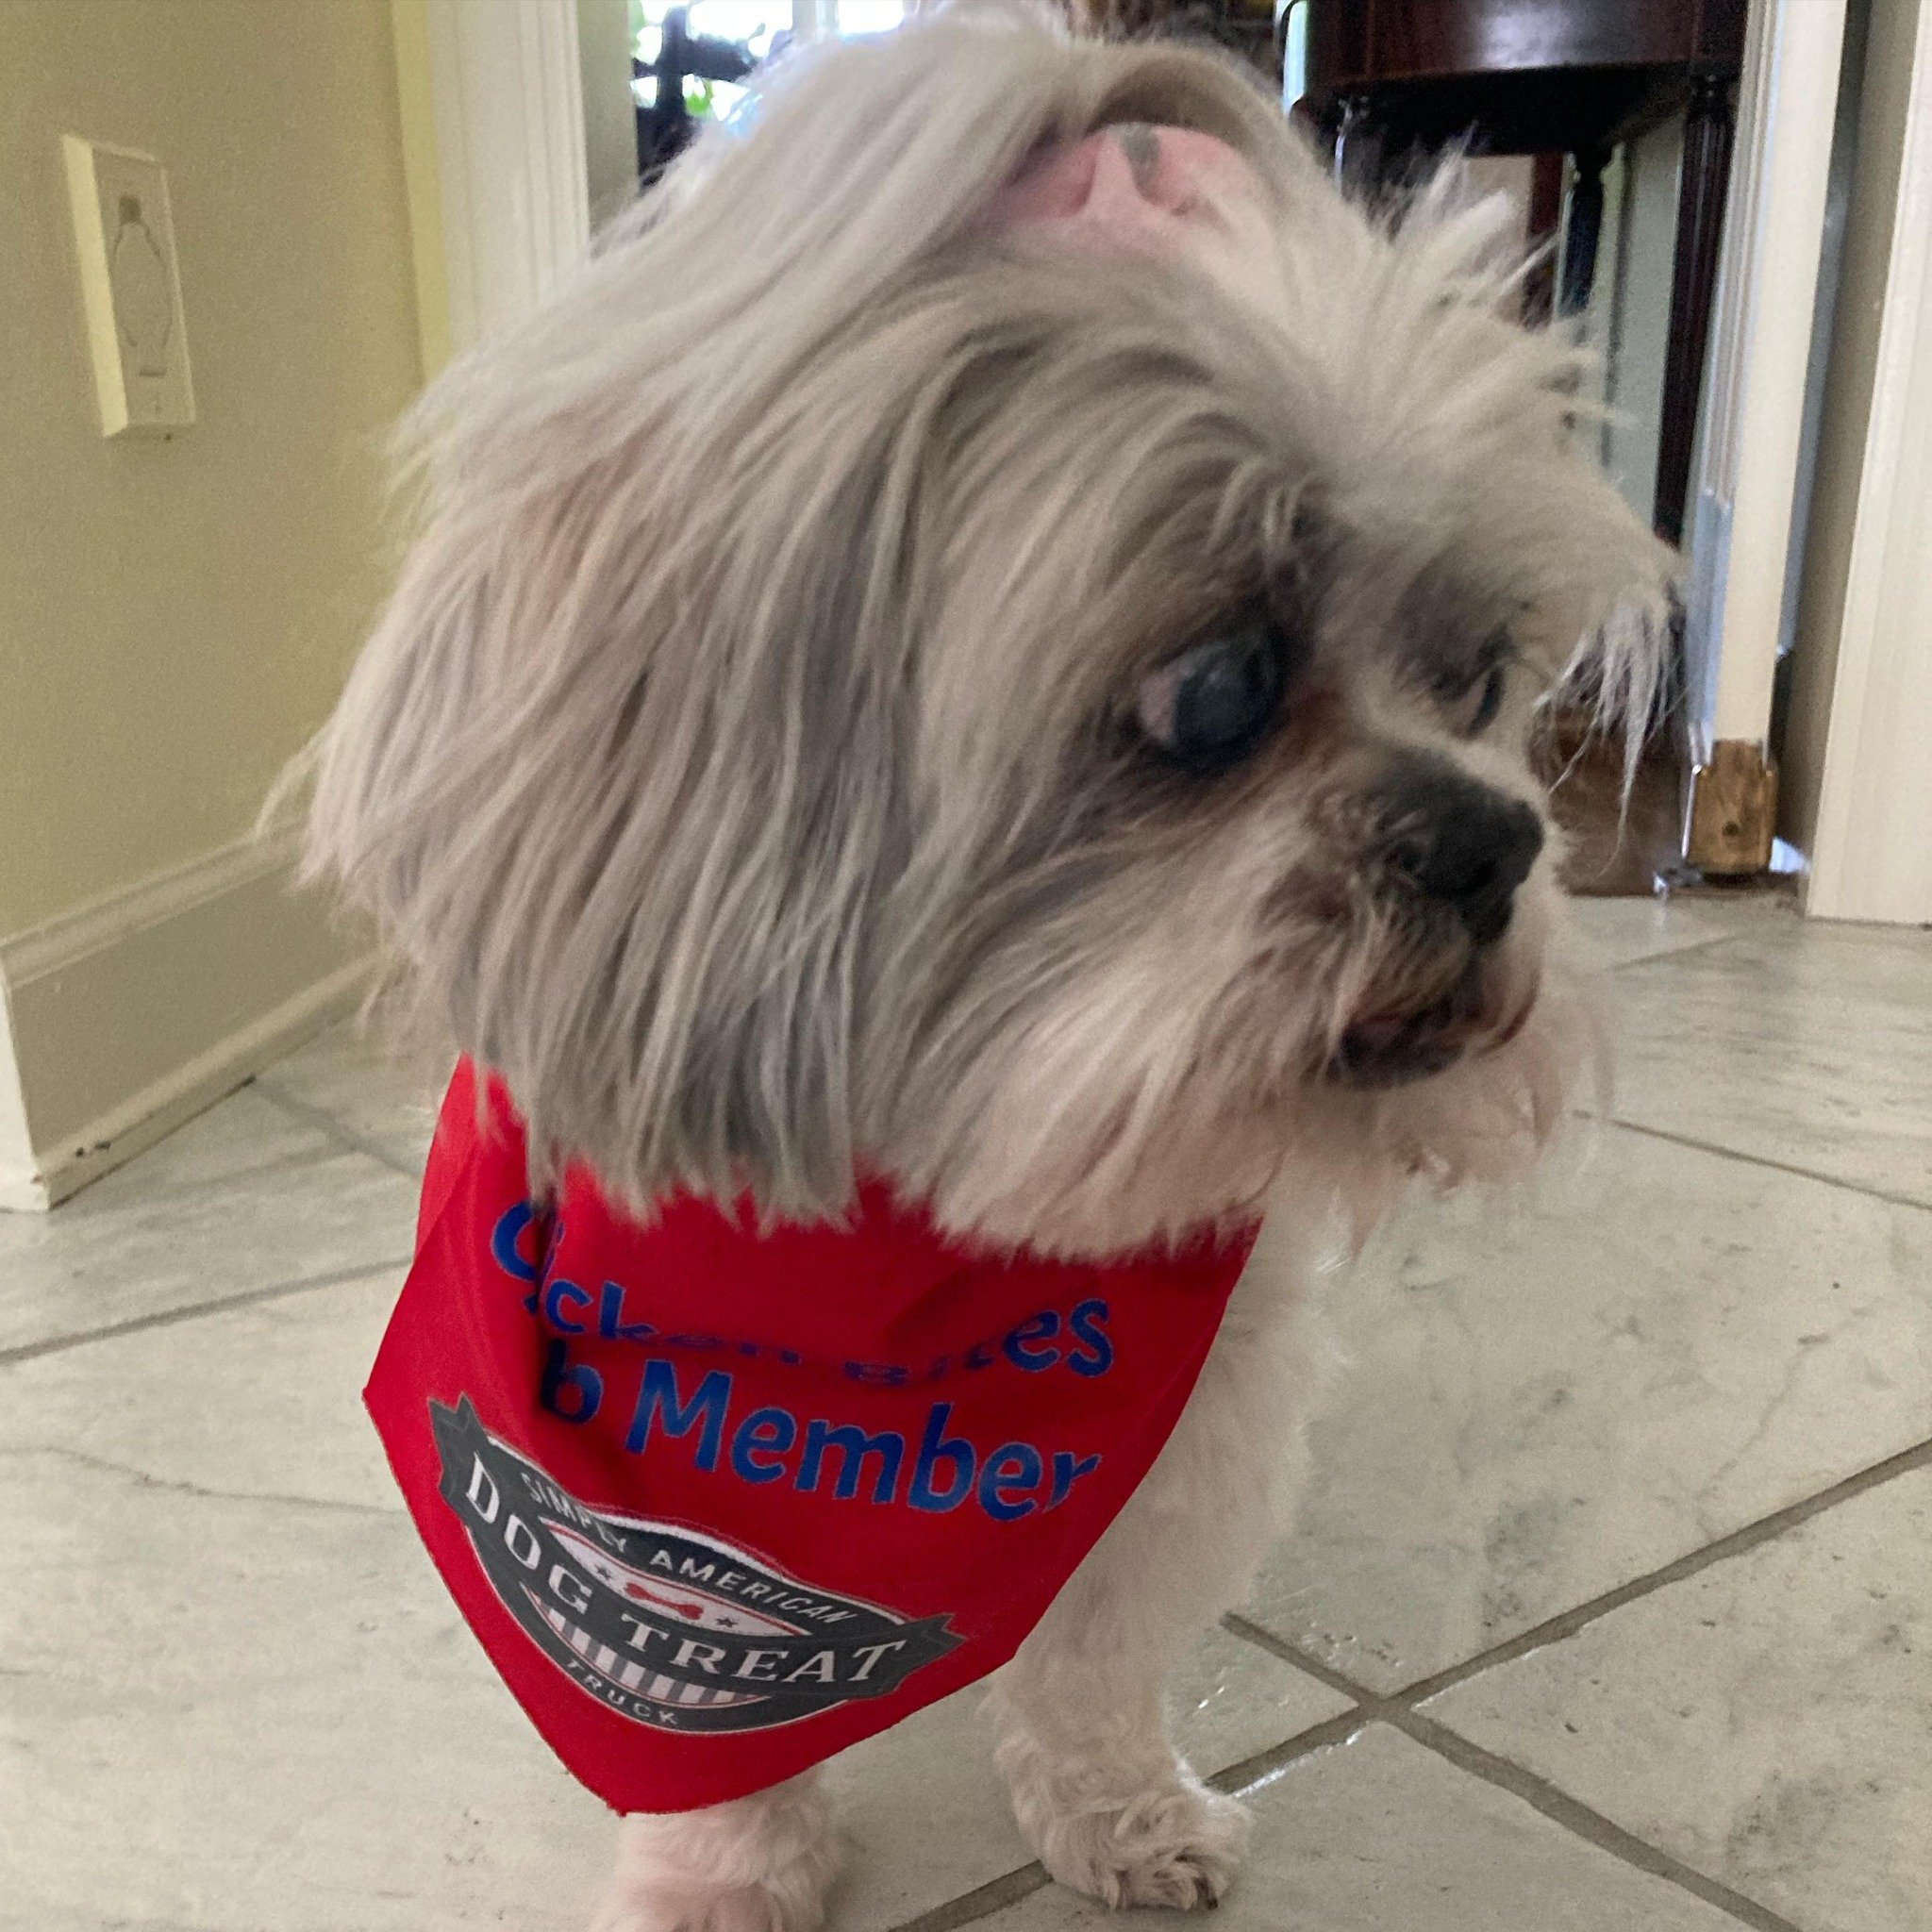 Darby Scott wears her Chicken Bites Club bandana like the Queen that she is. Join the Chicken Bites Club by ordering Chicken Bites from our website. Better yet&hellip; subscribe and receive them monthly! #chickenbites #chickenbitesclub #singleingredi